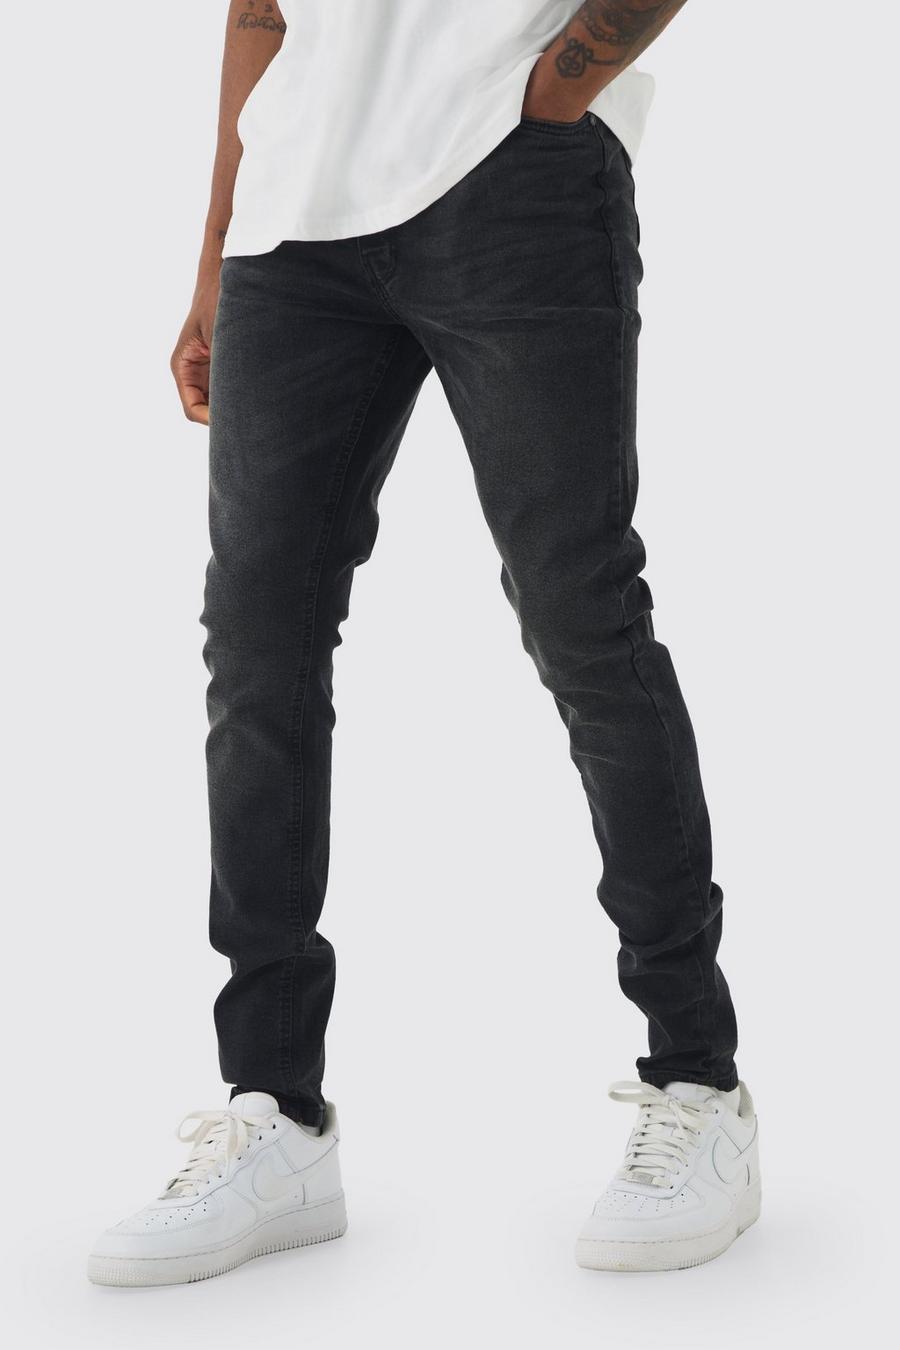 Washed black Tall Stretch Skinny Fit Jeans